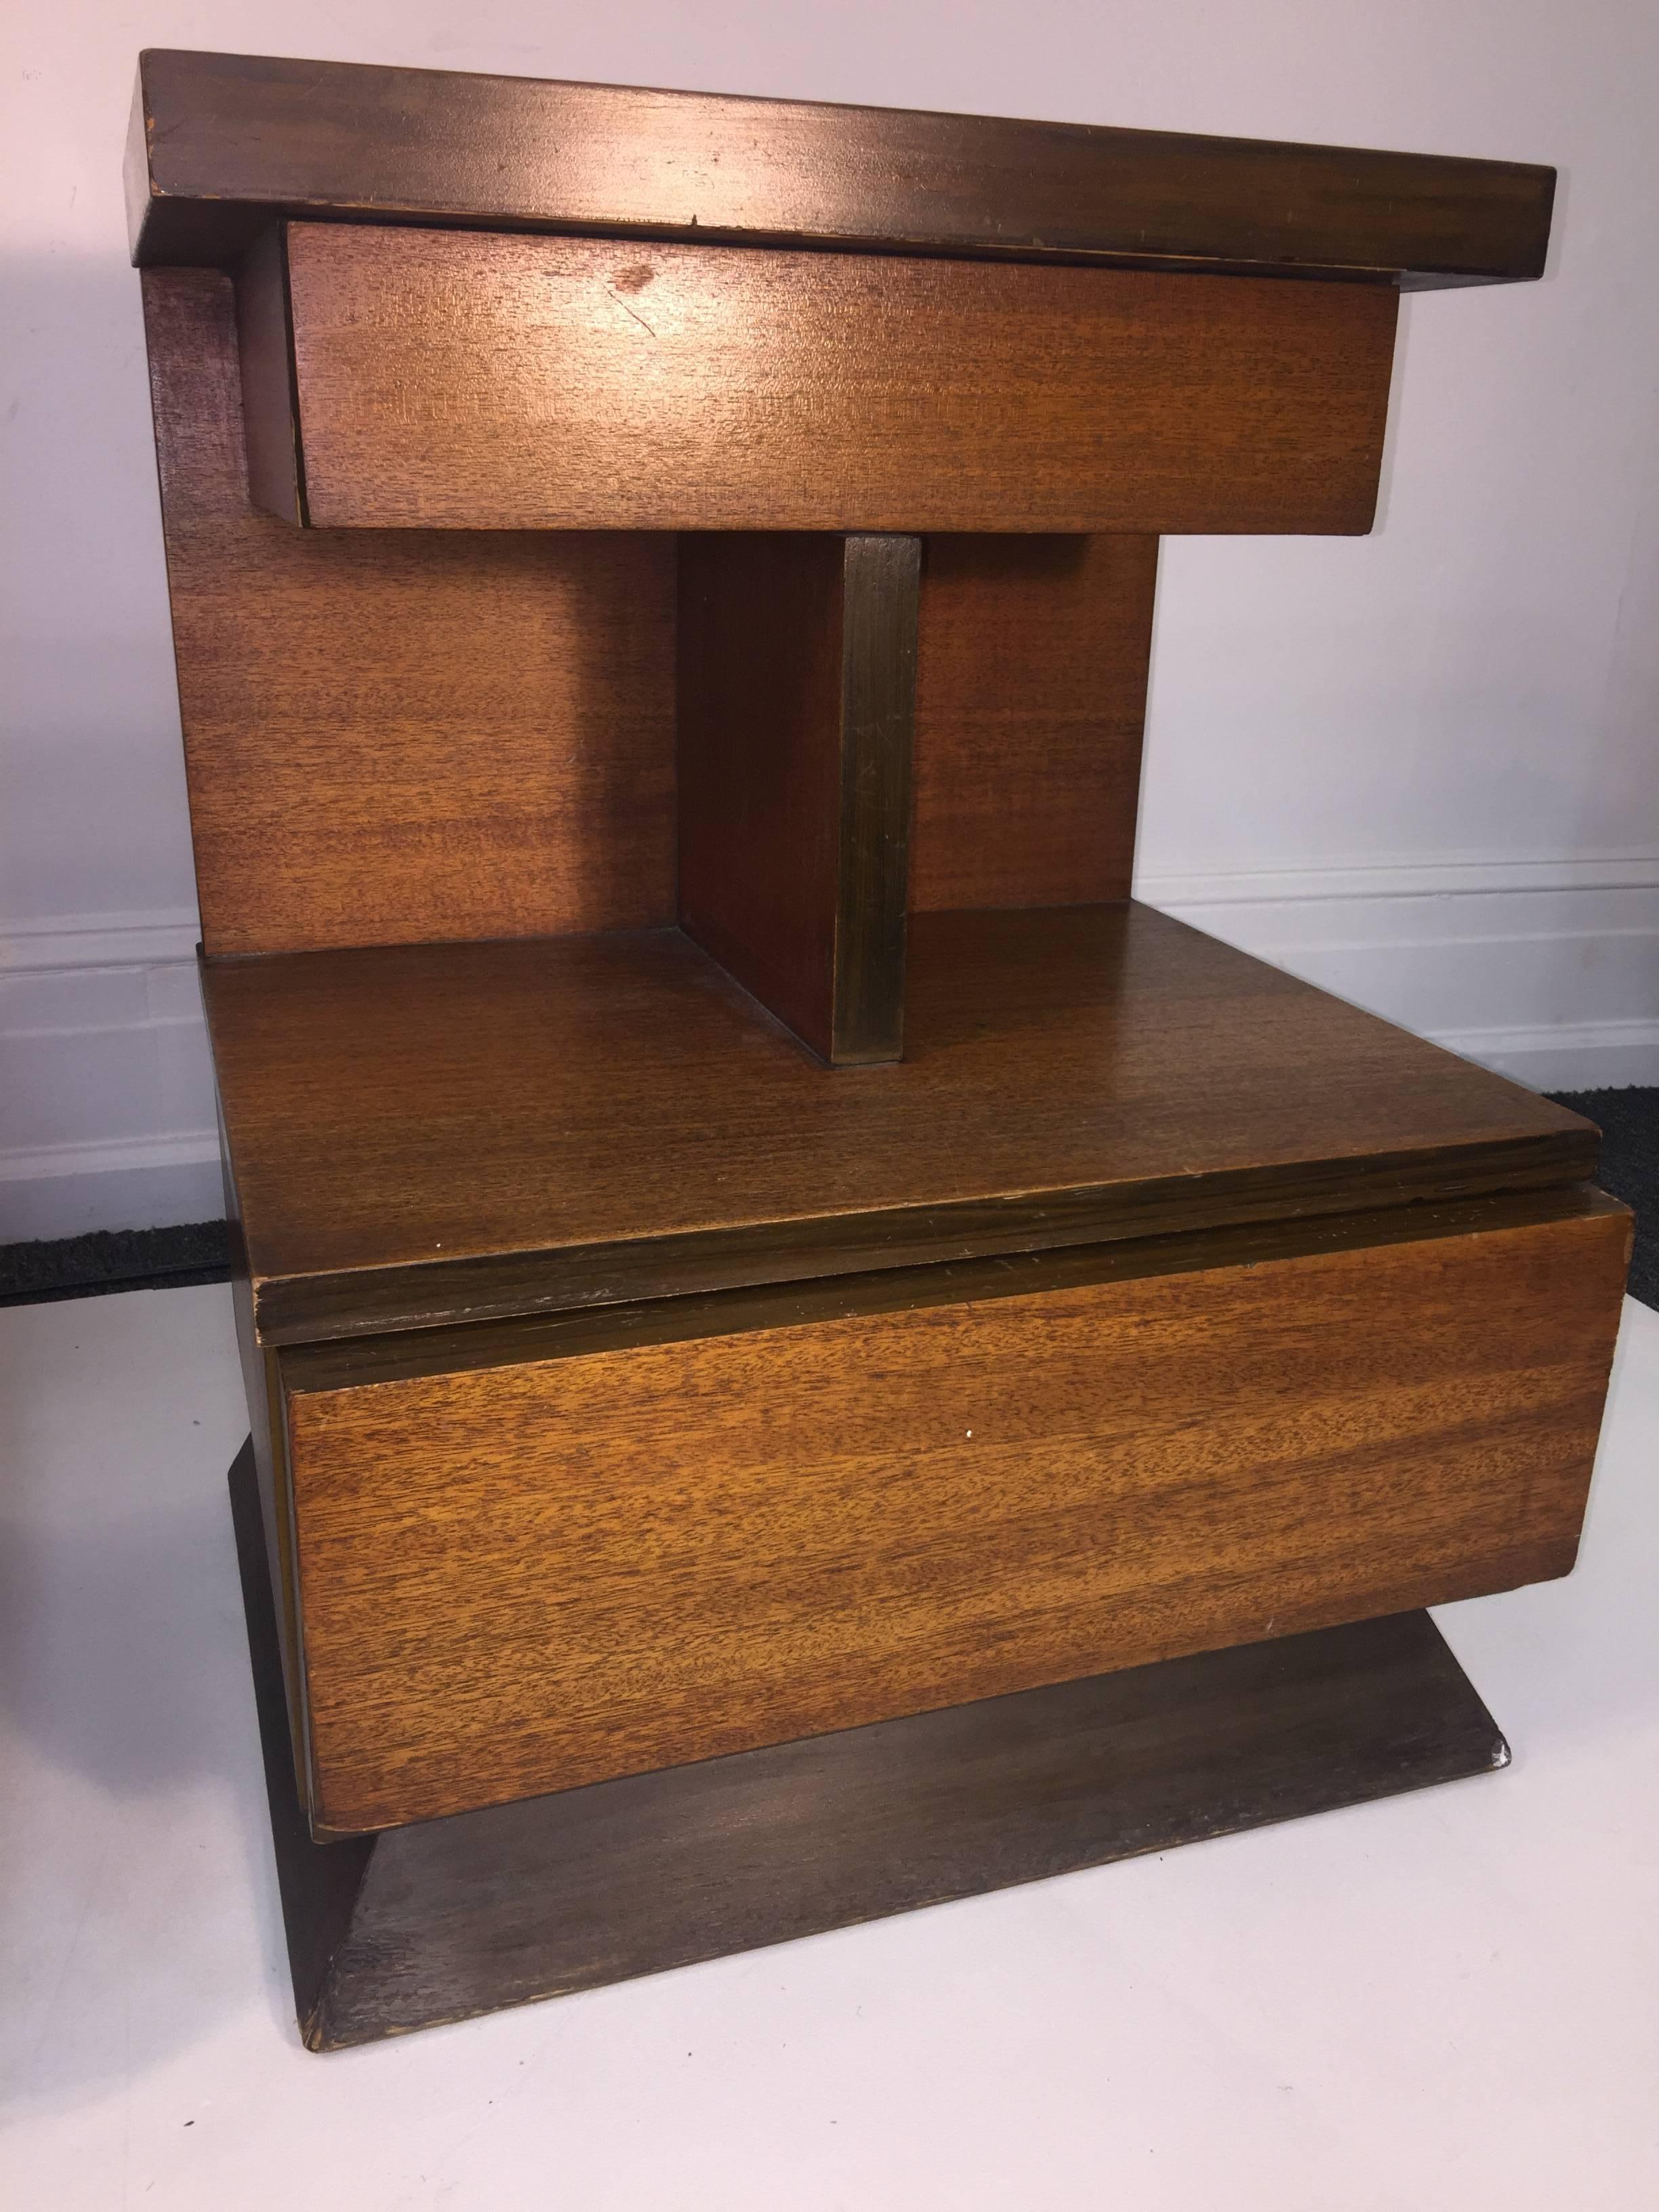 Modernist pair of American modern nightstands with two drawers in ebony and walnut striated wood designed in an angular modern design. In original midcentury unrestored condition. If wanting these perfect refinishing is recommended.
 